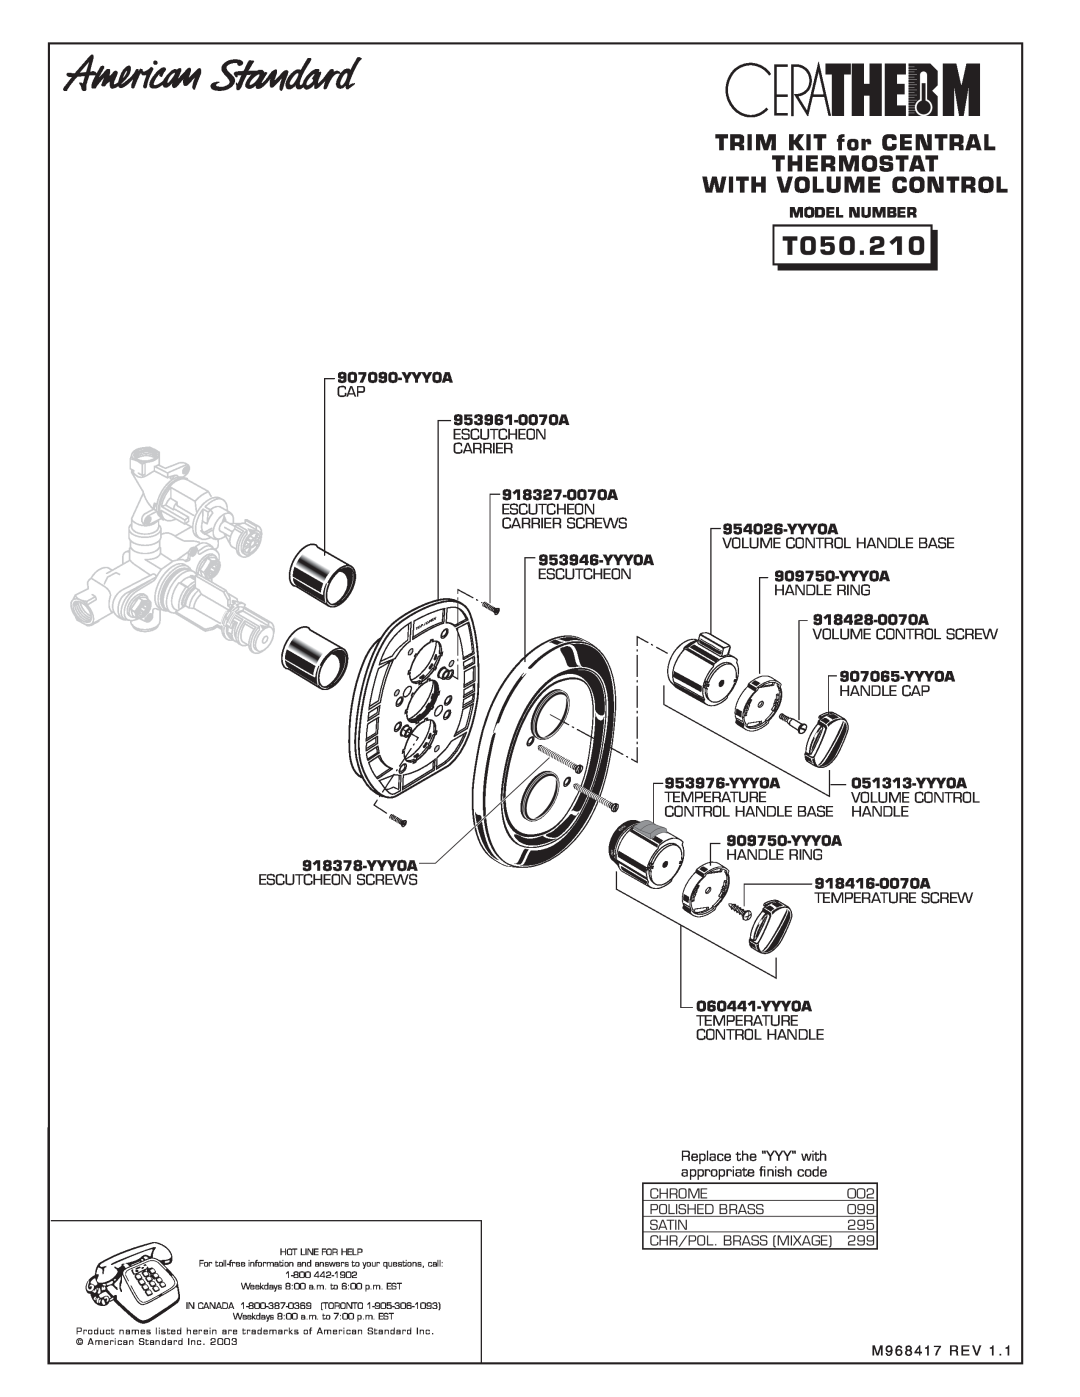 American Standard T050.210 installation instructions TRIM KIT for CENTRAL THERMOSTAT WITH VOLUME CONTROL 